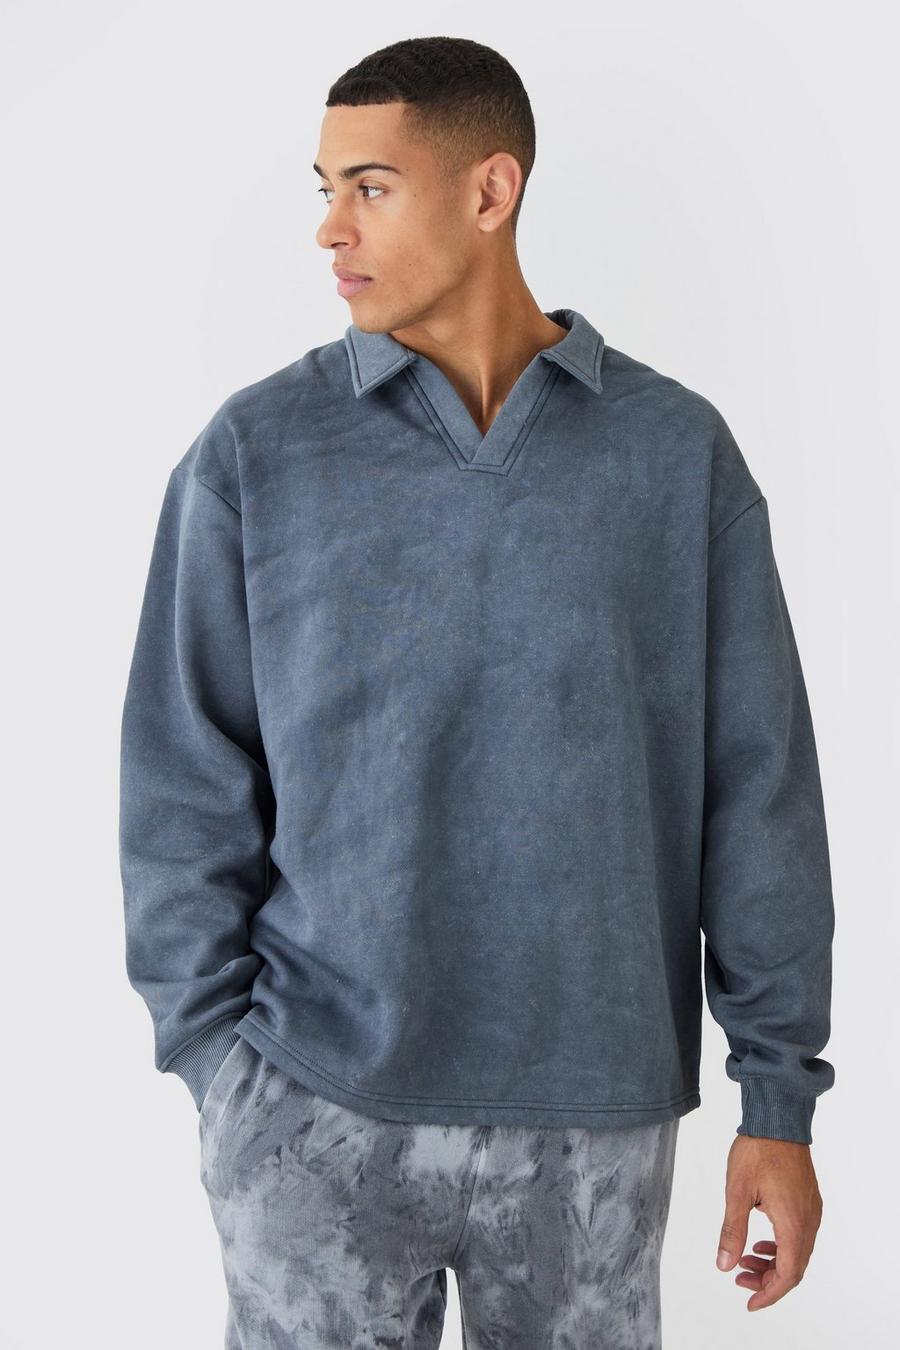 Charcoal grey Oversized Washed Revere Rugby Sweatshirt Polo 